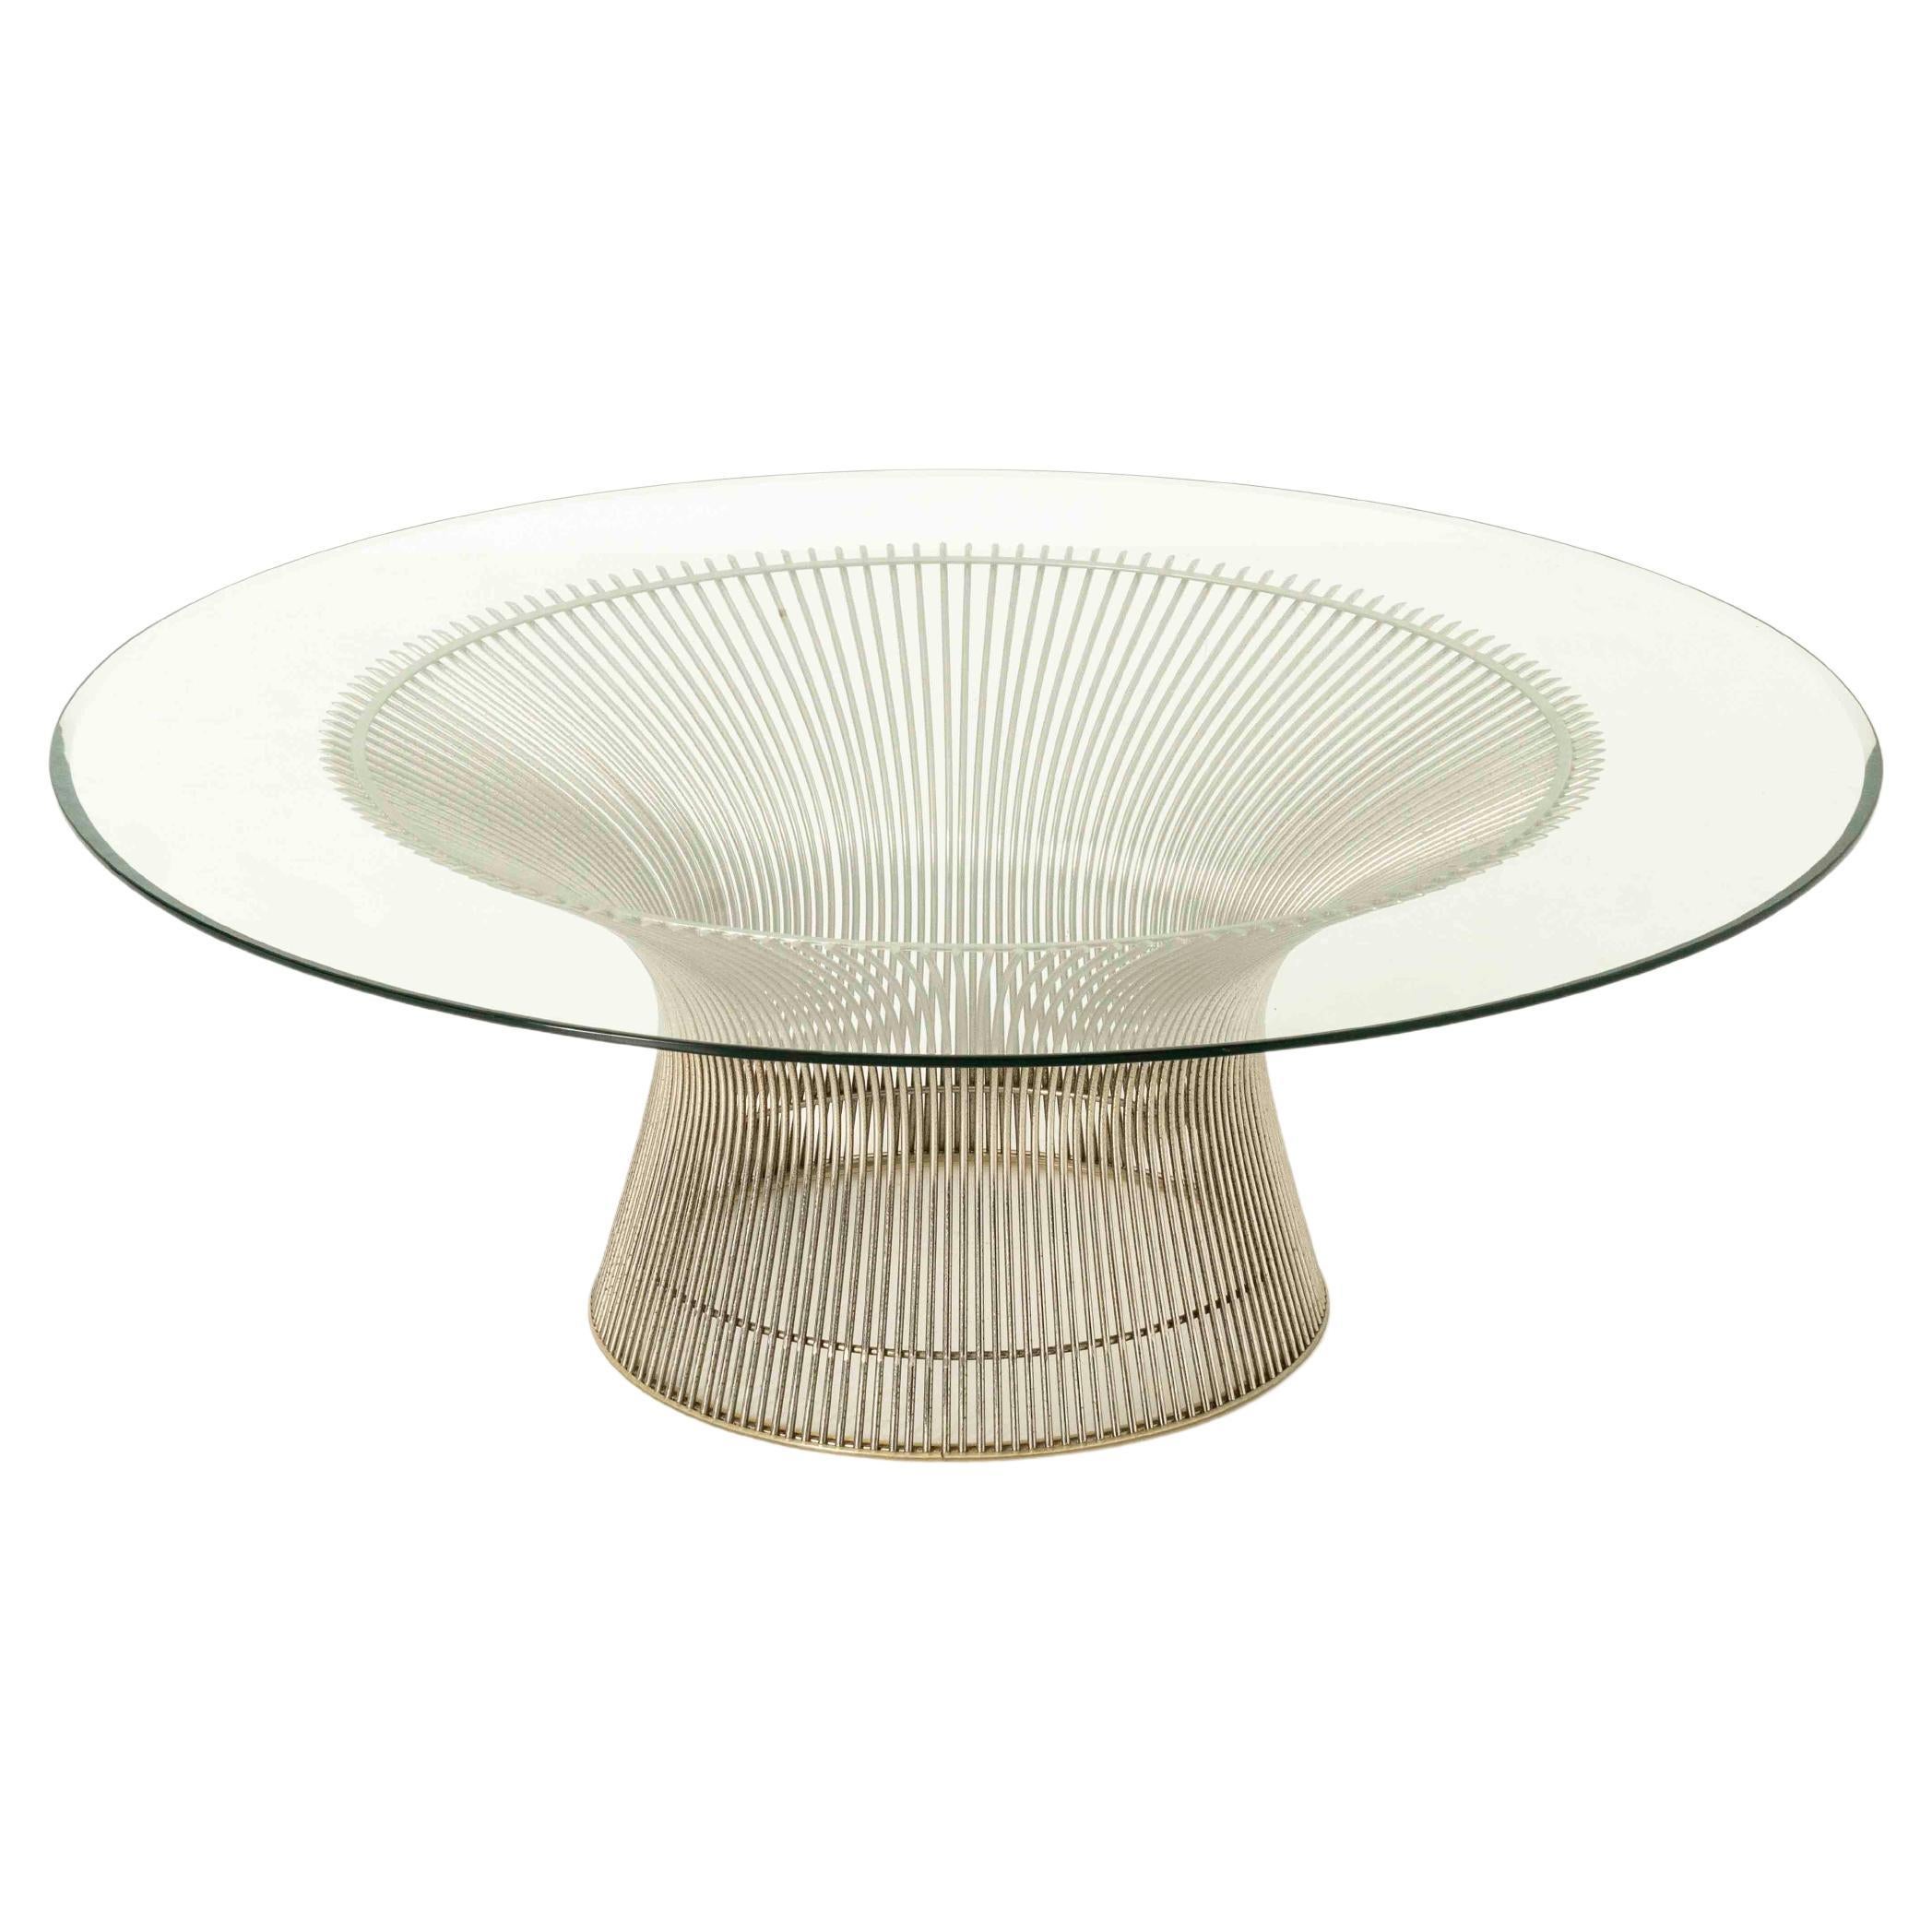 Warren Platner Coffee Table for Knoll with Glass and Nickel, USA 1970s